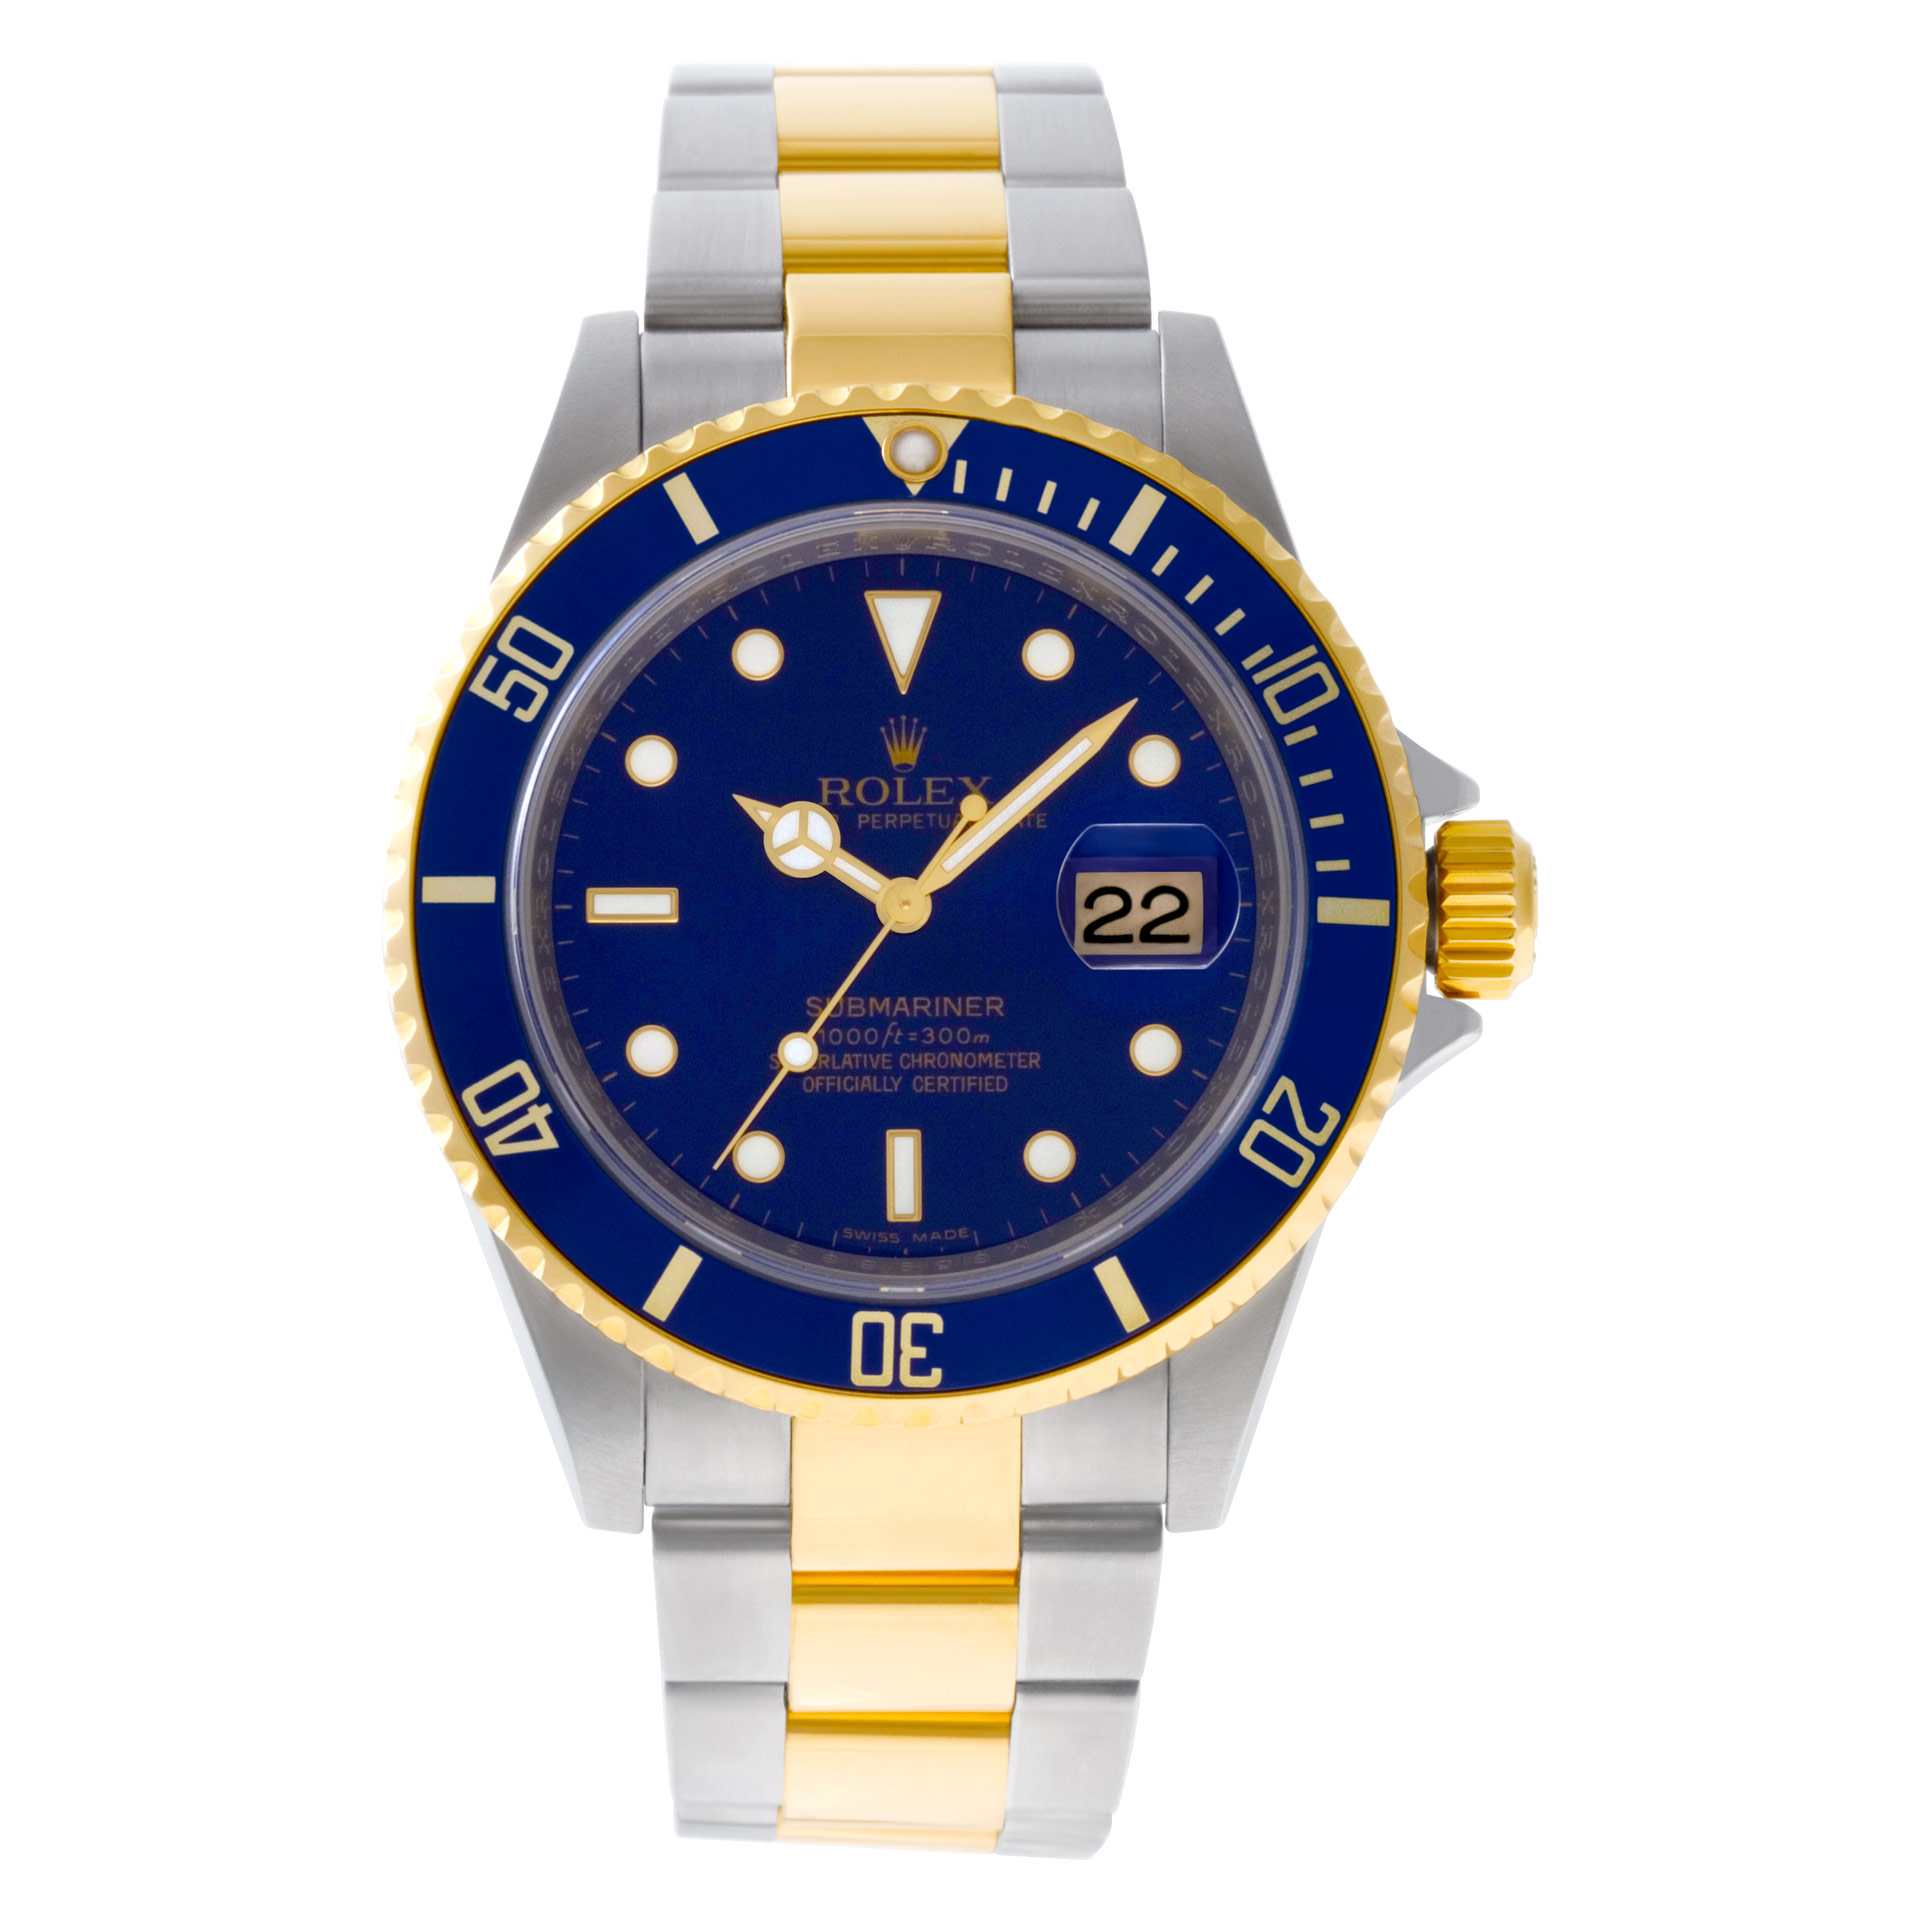 Pre-owned Rolex Submariner 11613 18k 